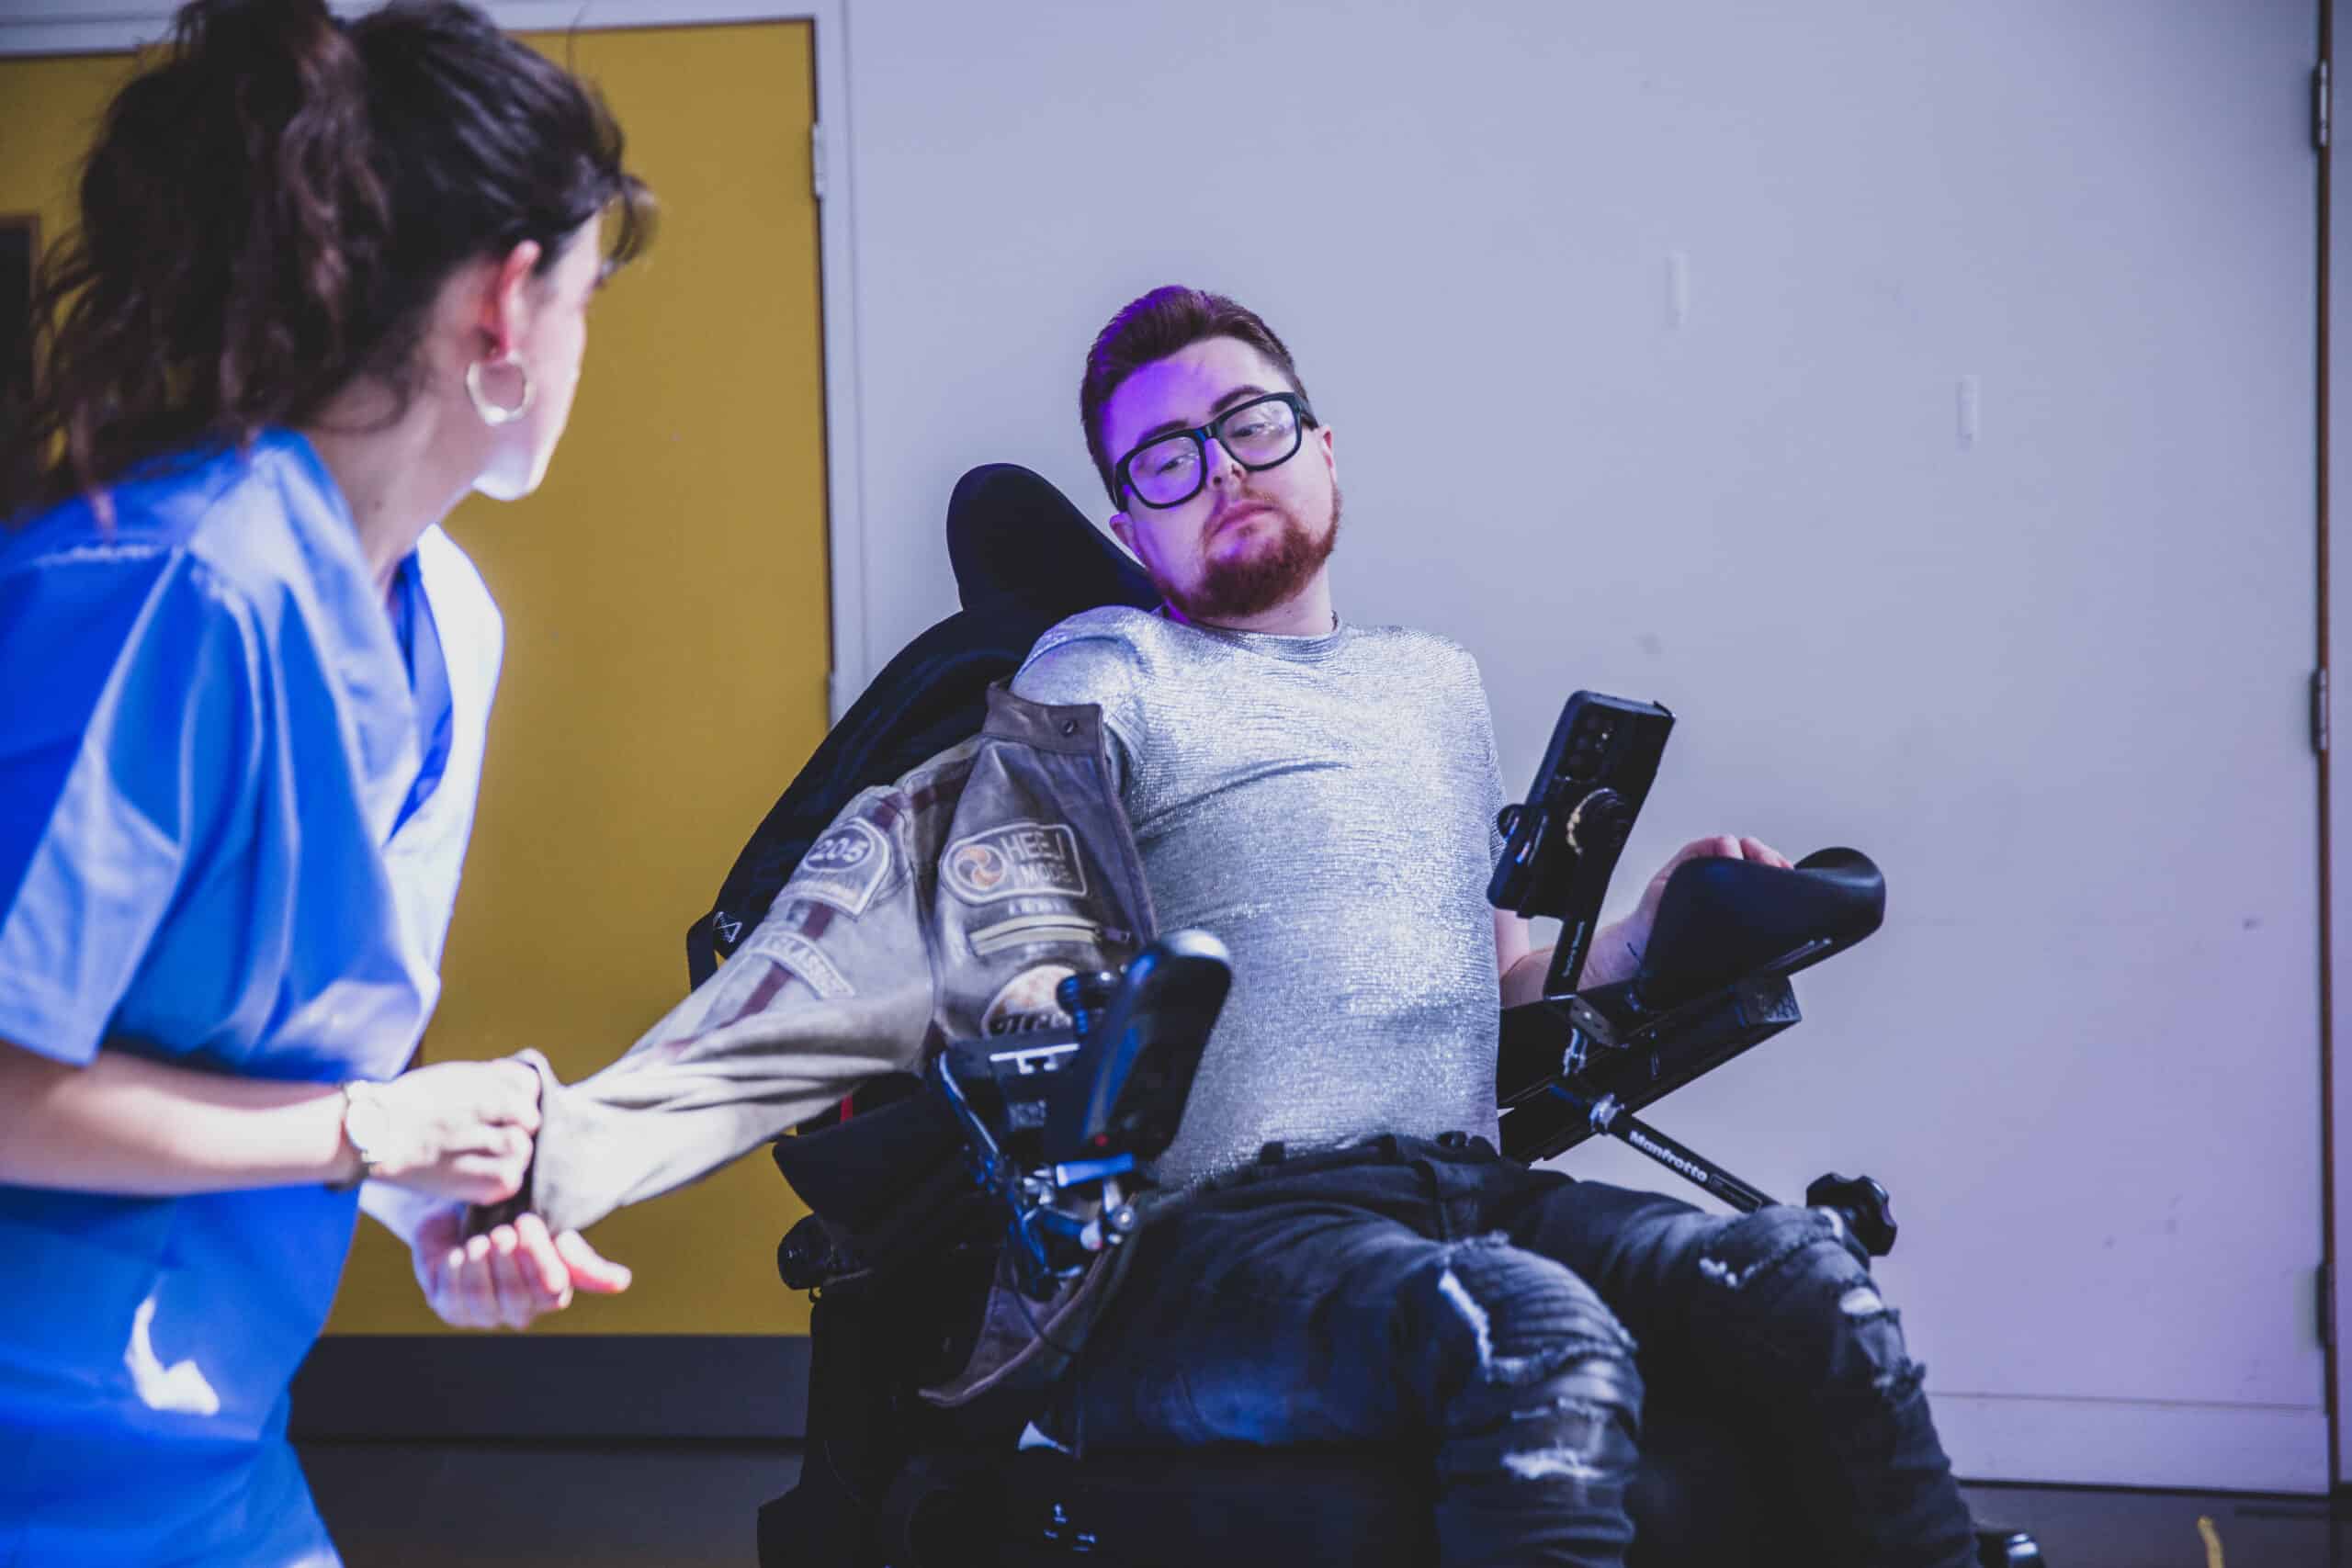 Jamie, a white person with dark red hair and beard, sits in an electric wheelchair, wearing ripped black jeans and a silver top. Sophie, a white woman with brown hair in blue scrubs is at the side of the image, pulling a leather jacket off Jamie's arm, as Jamie looks at her, camp and poised